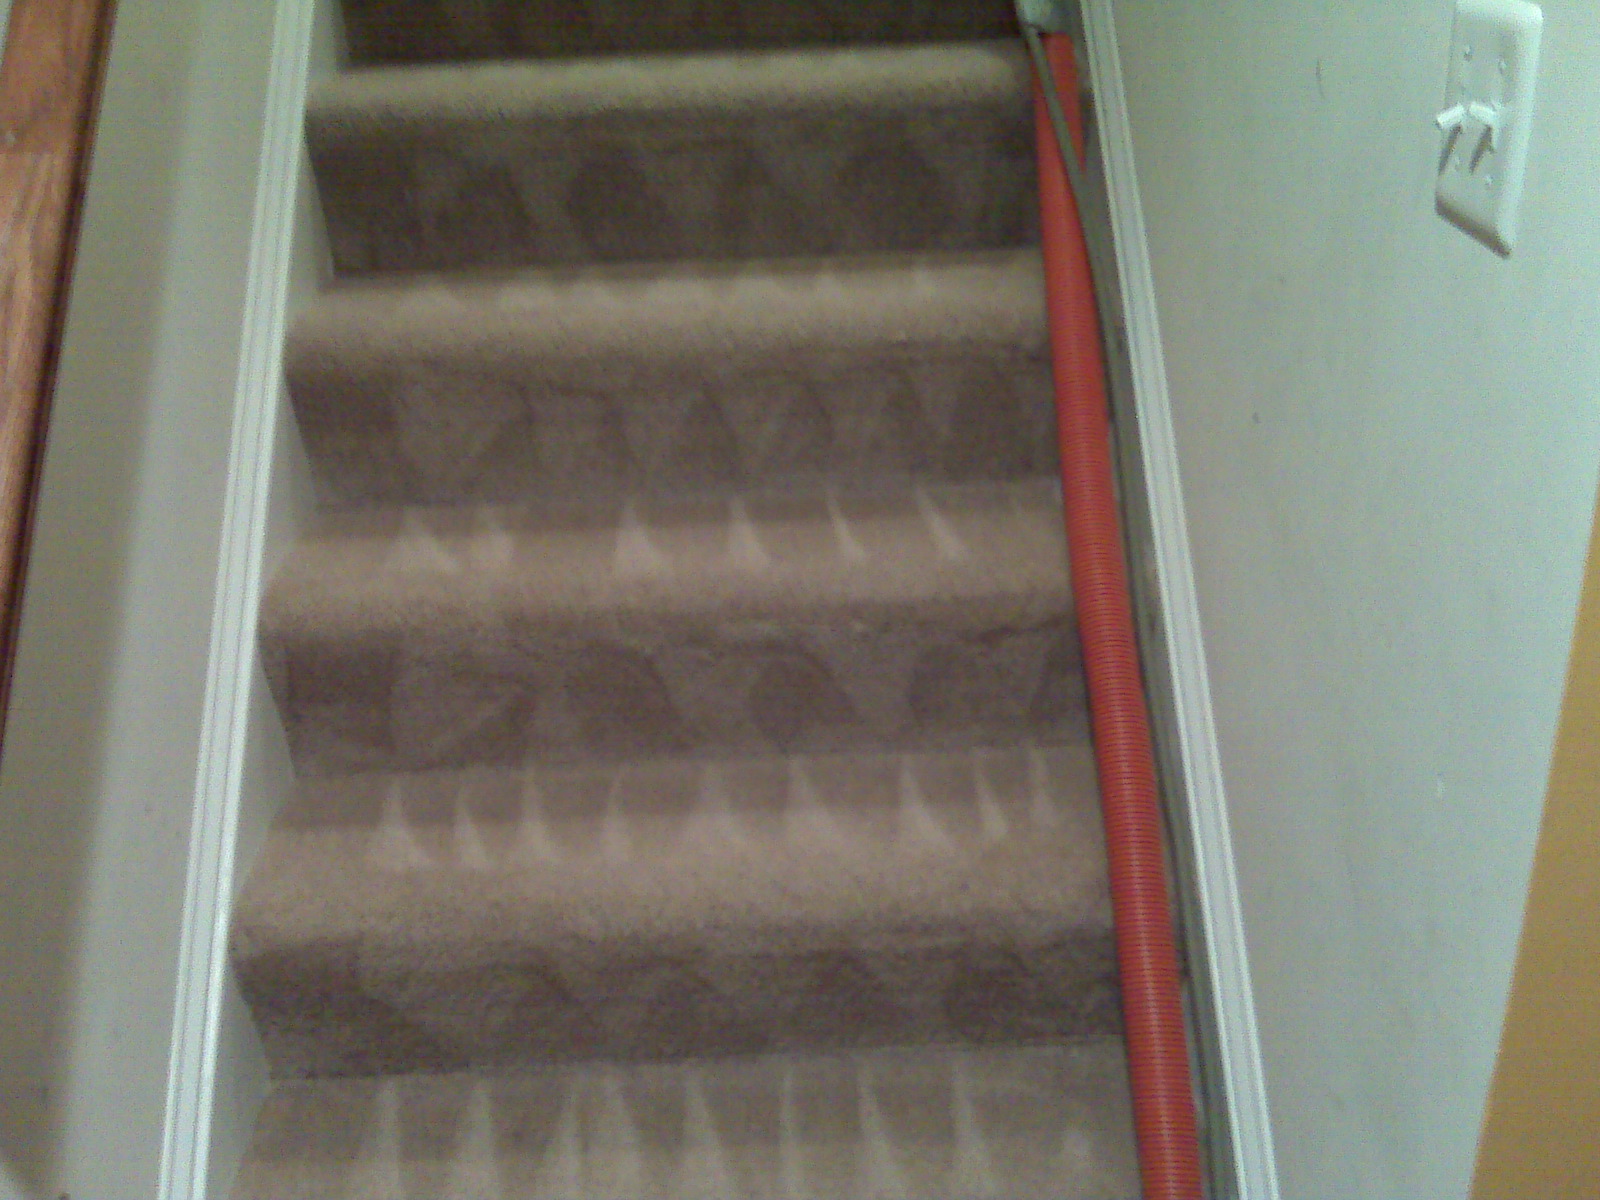 Stairs cleaned in fairfax, carpet cleaning fairfax 22033, carpet cleaners